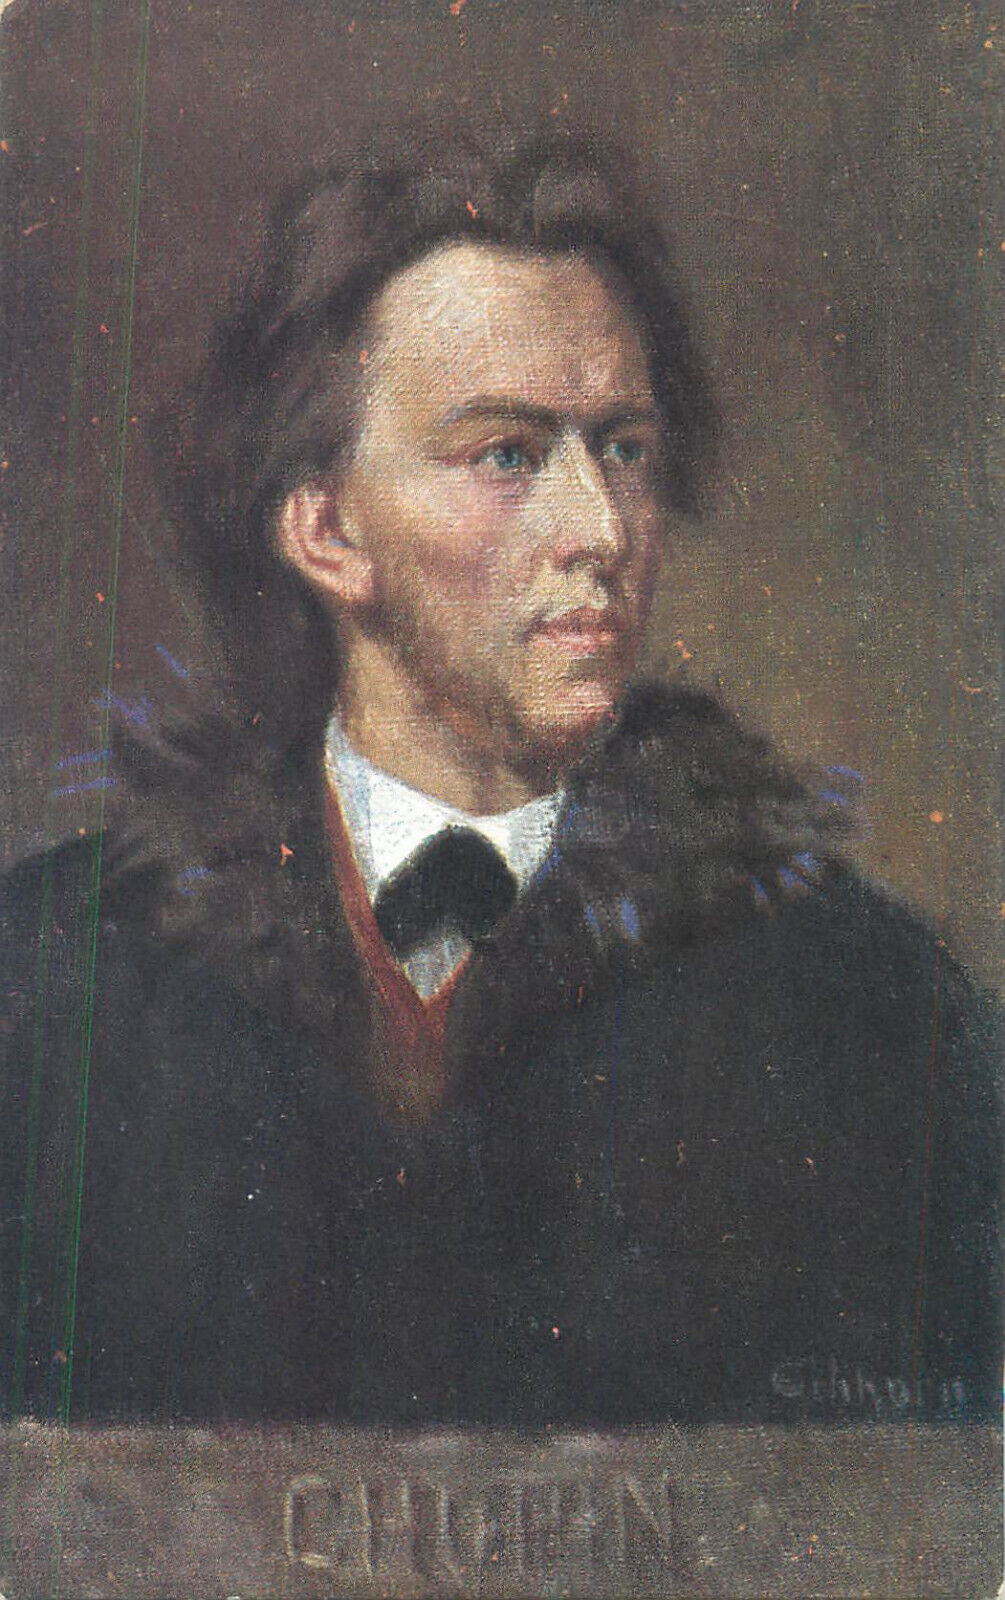 Polish composer and virtuoso pianist of the Romantic period Frédéric Chopin